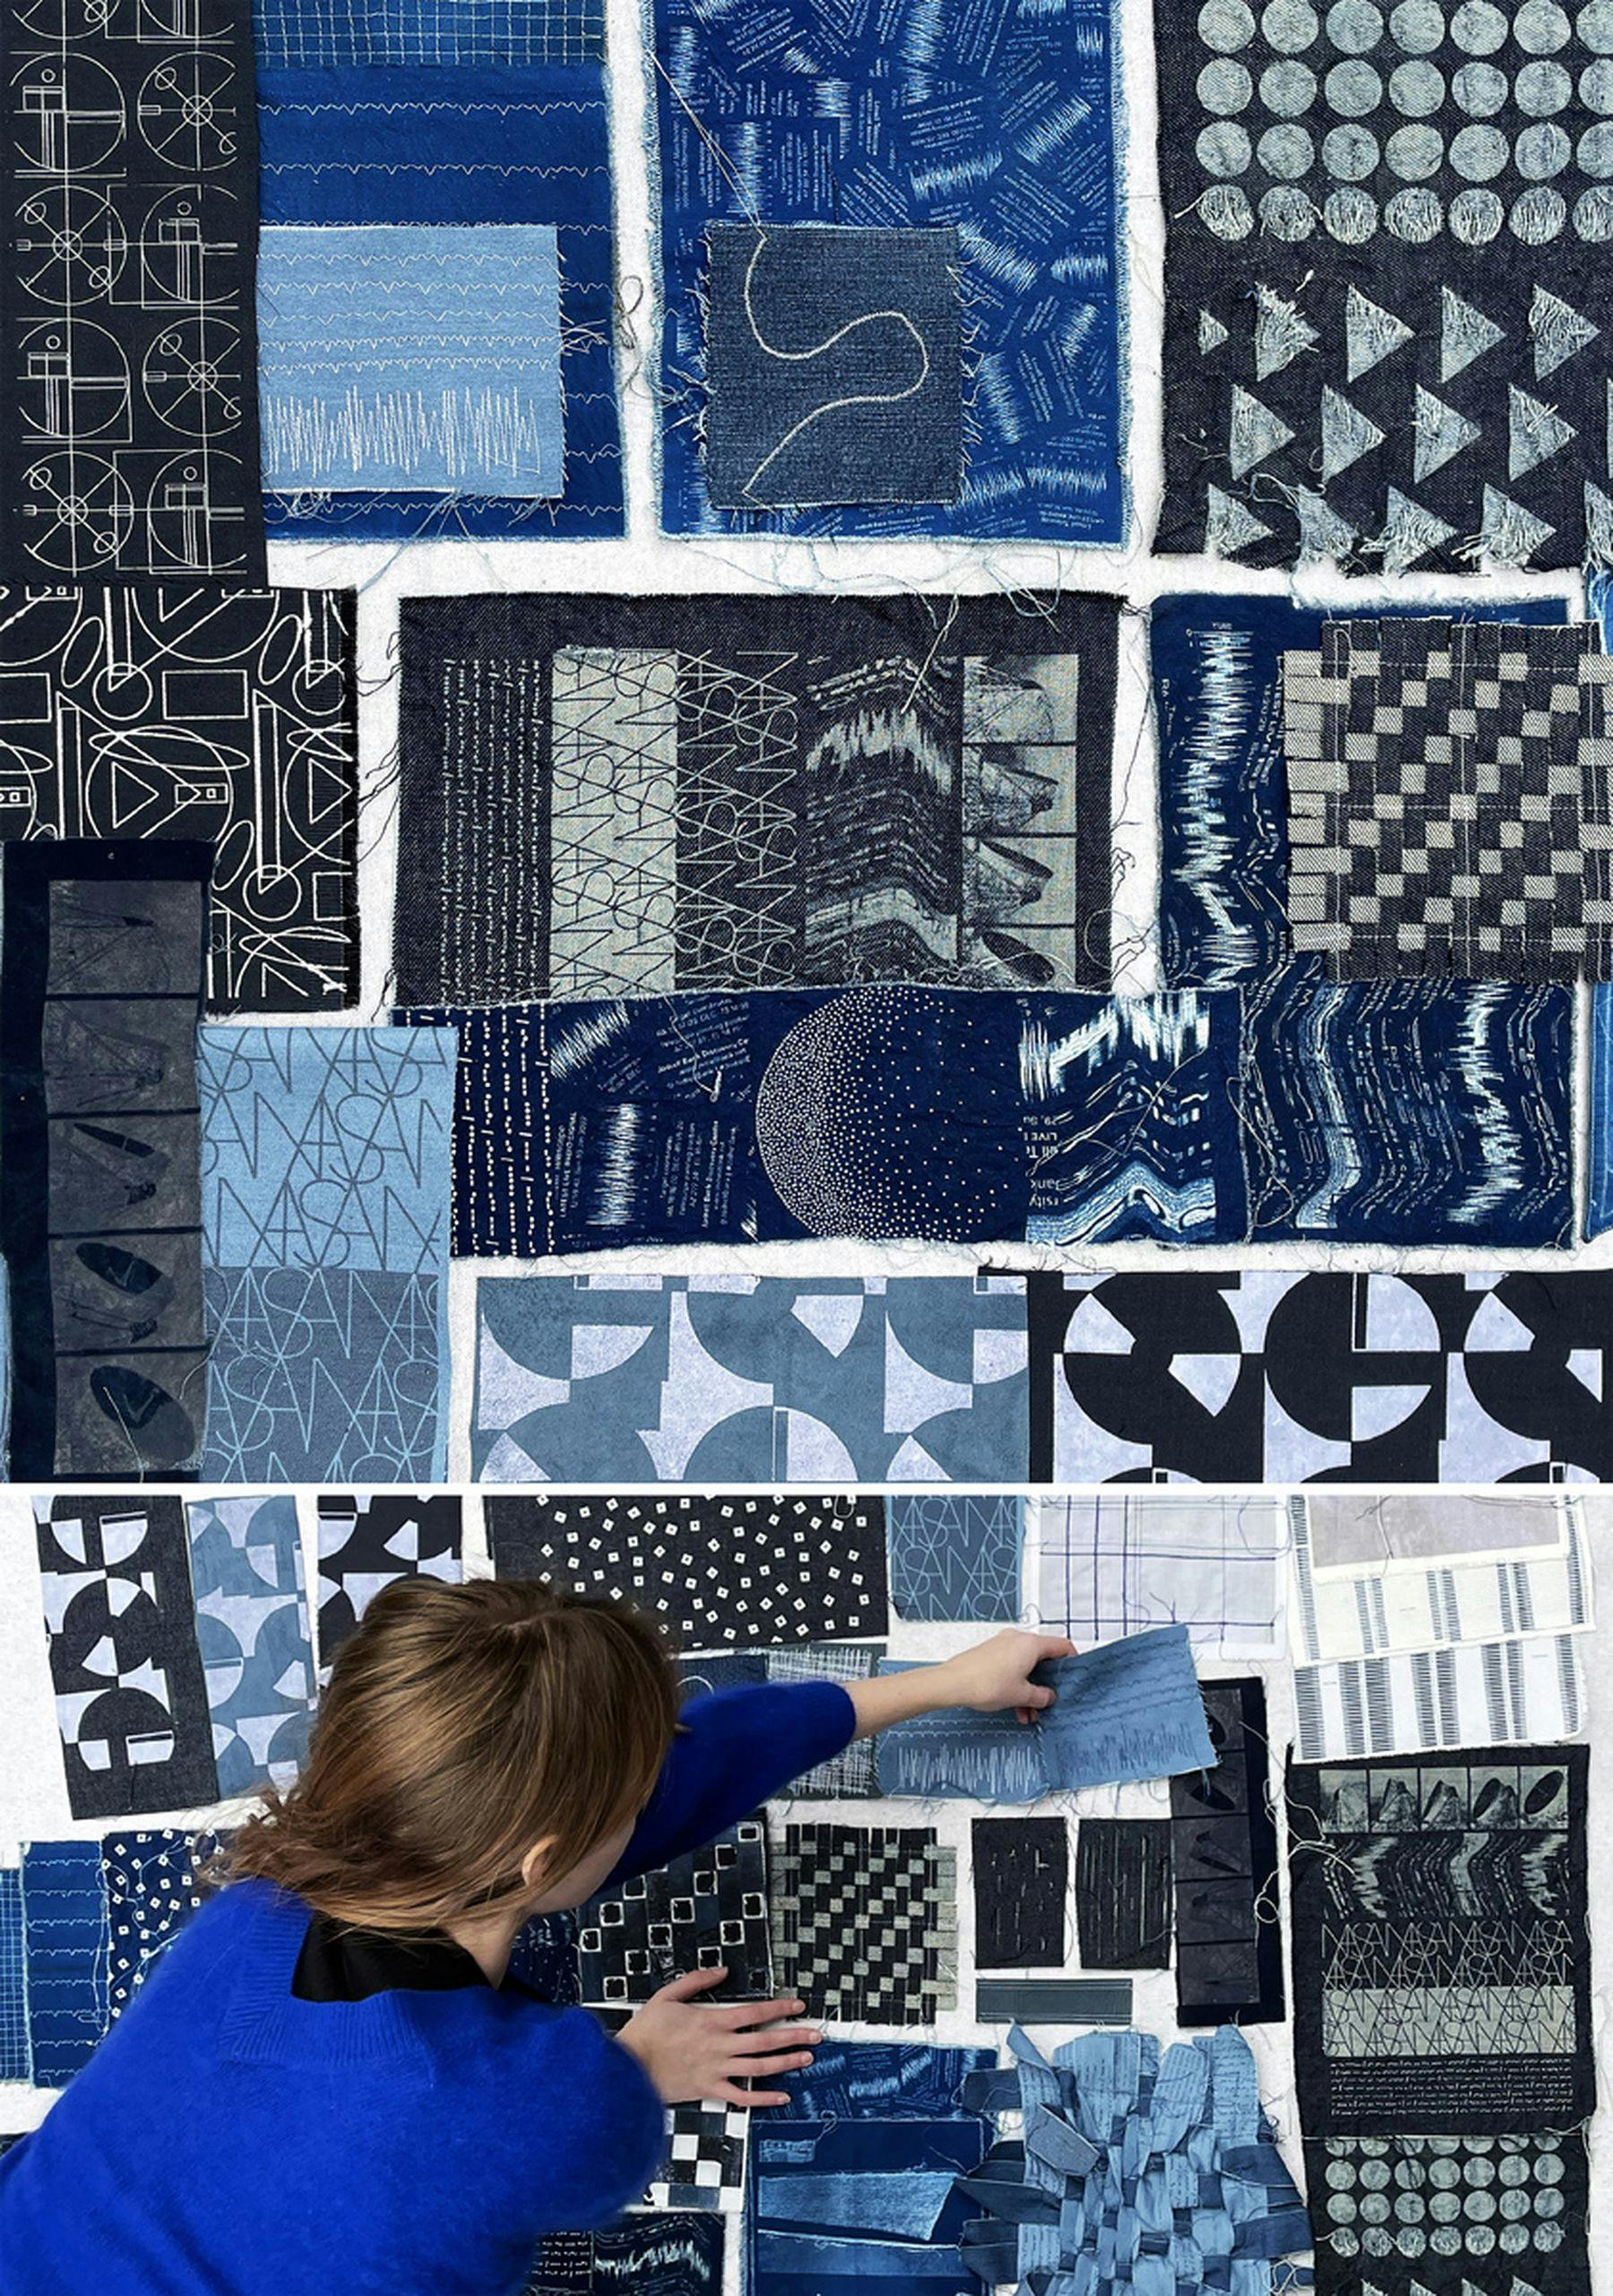 Two photographs featuring a collage of various blue fabrics placed together with different print and embroidered patterns. The second photograph shows a person placing a piece of fabric on the collage.